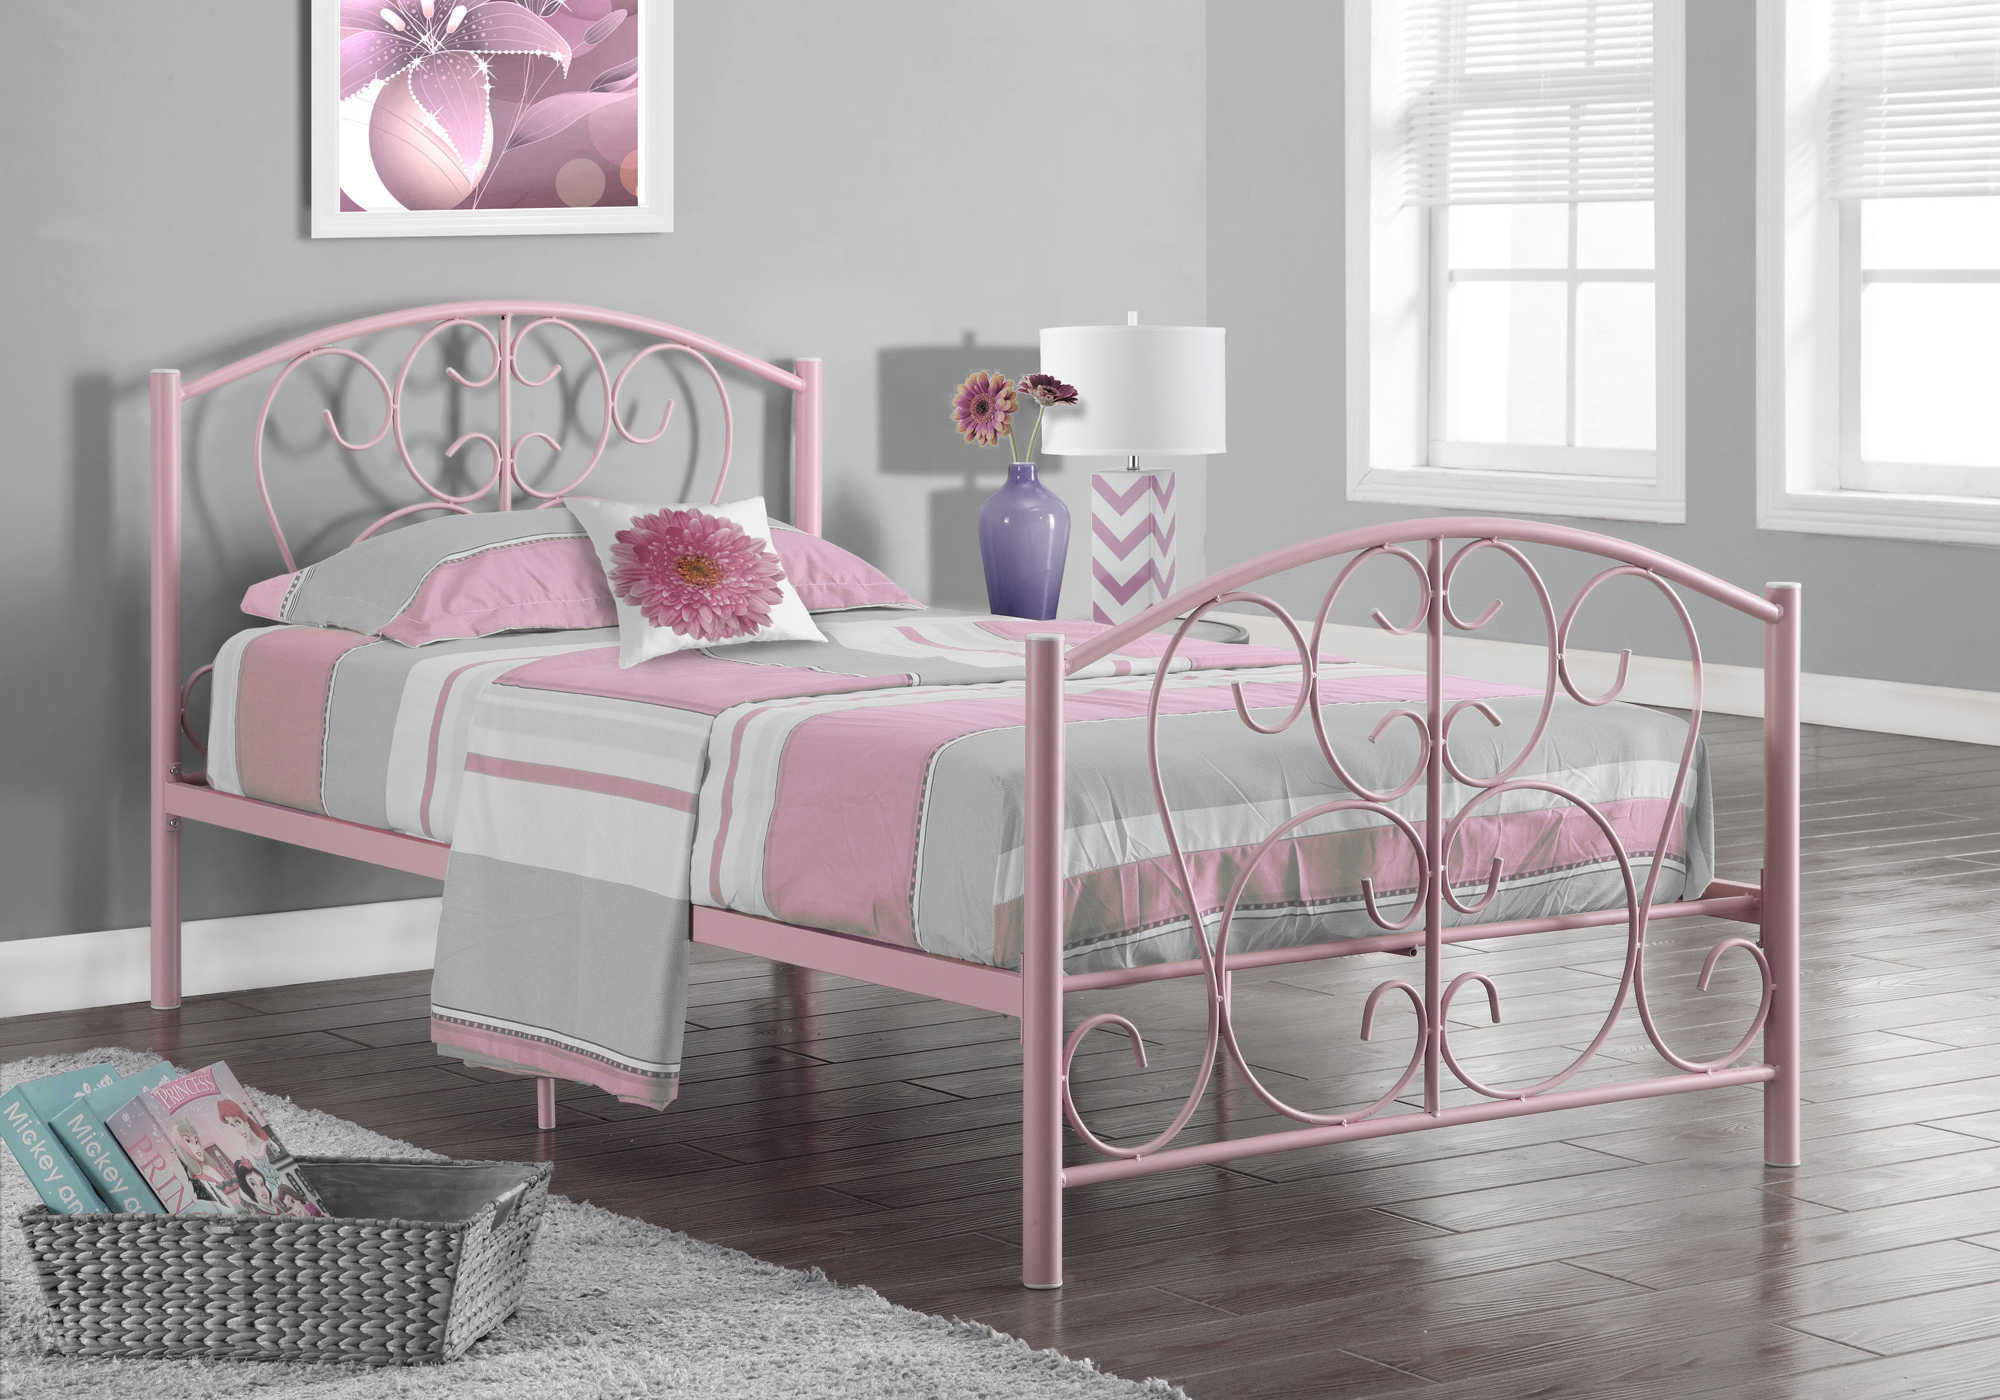 BED - TWIN SIZE / PINK METAL FRAME ONLY